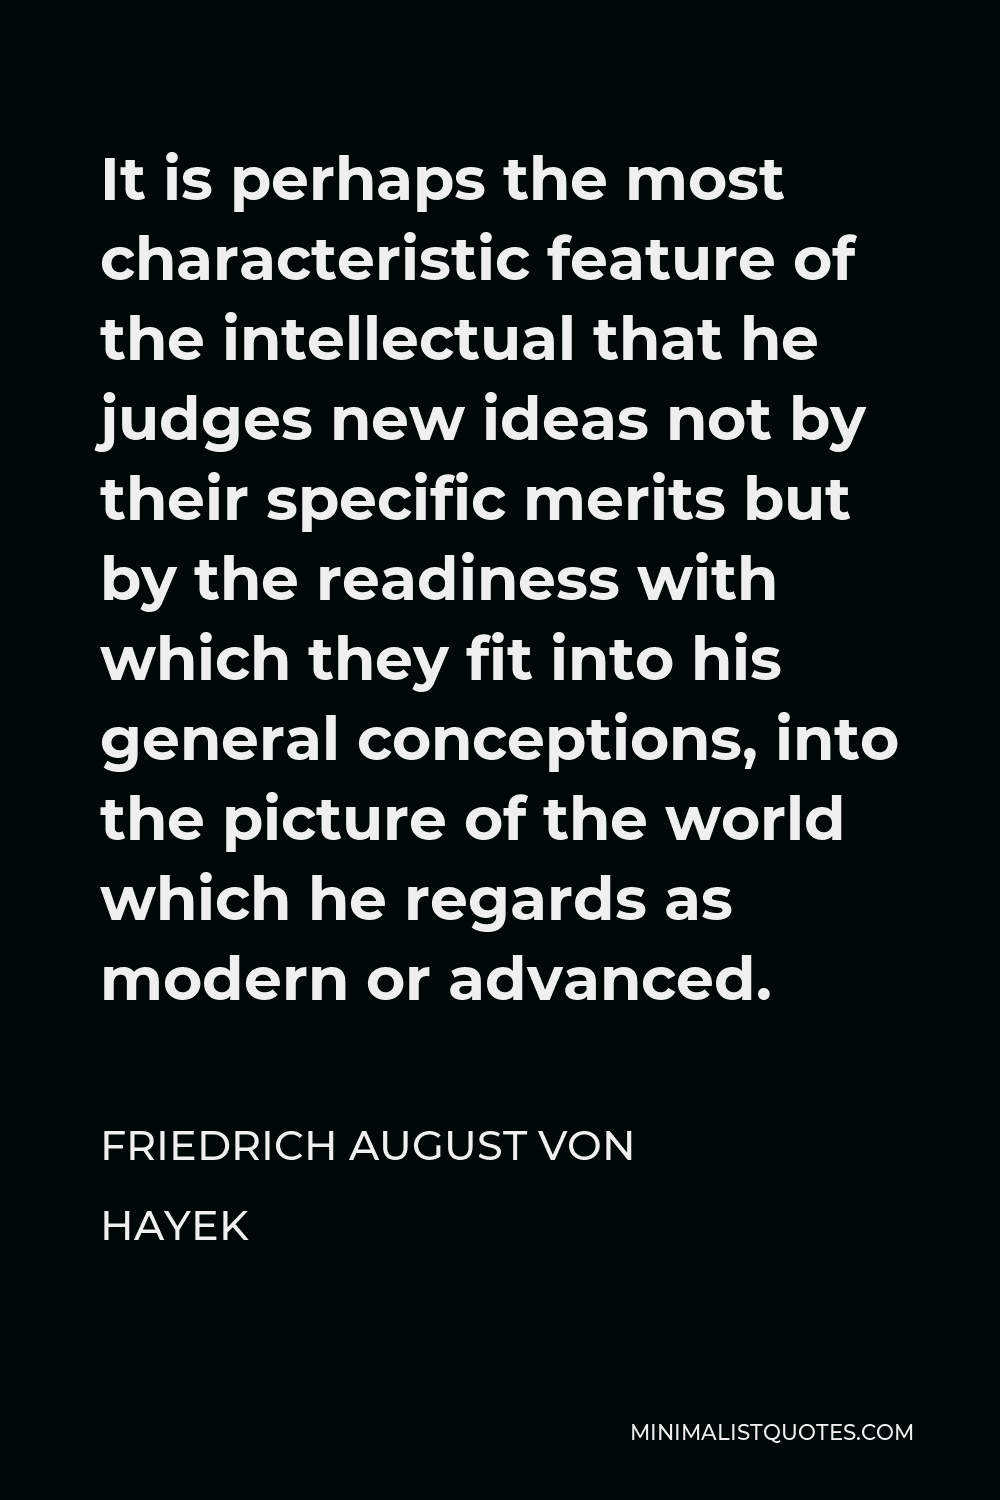 Friedrich August von Hayek Quote - It is perhaps the most characteristic feature of the intellectual that he judges new ideas not by their specific merits but by the readiness with which they fit into his general conceptions, into the picture of the world which he regards as modern or advanced.